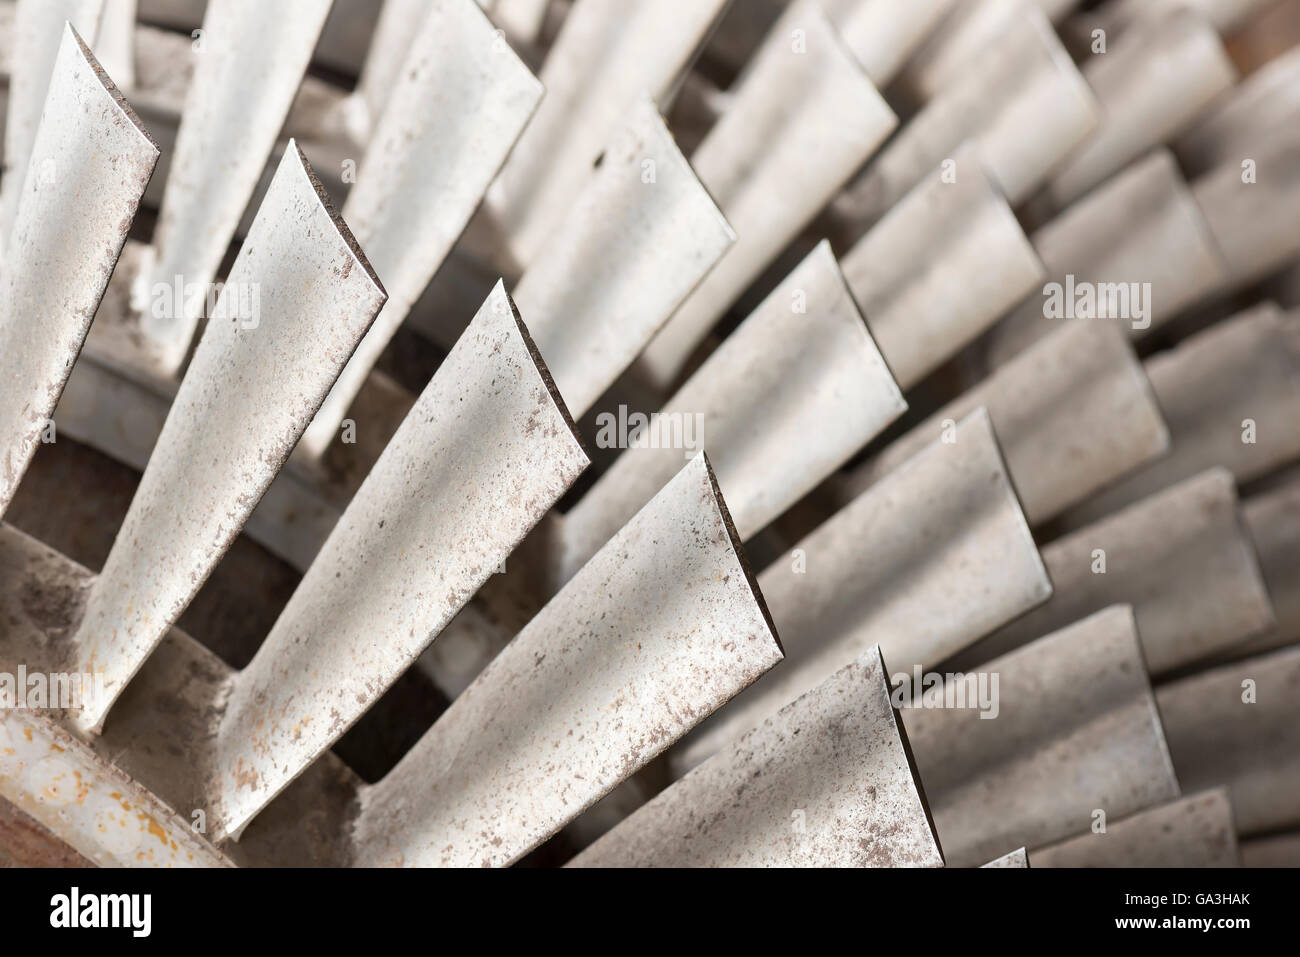 Industrial metal turbine blades in an old factory Stock Photo